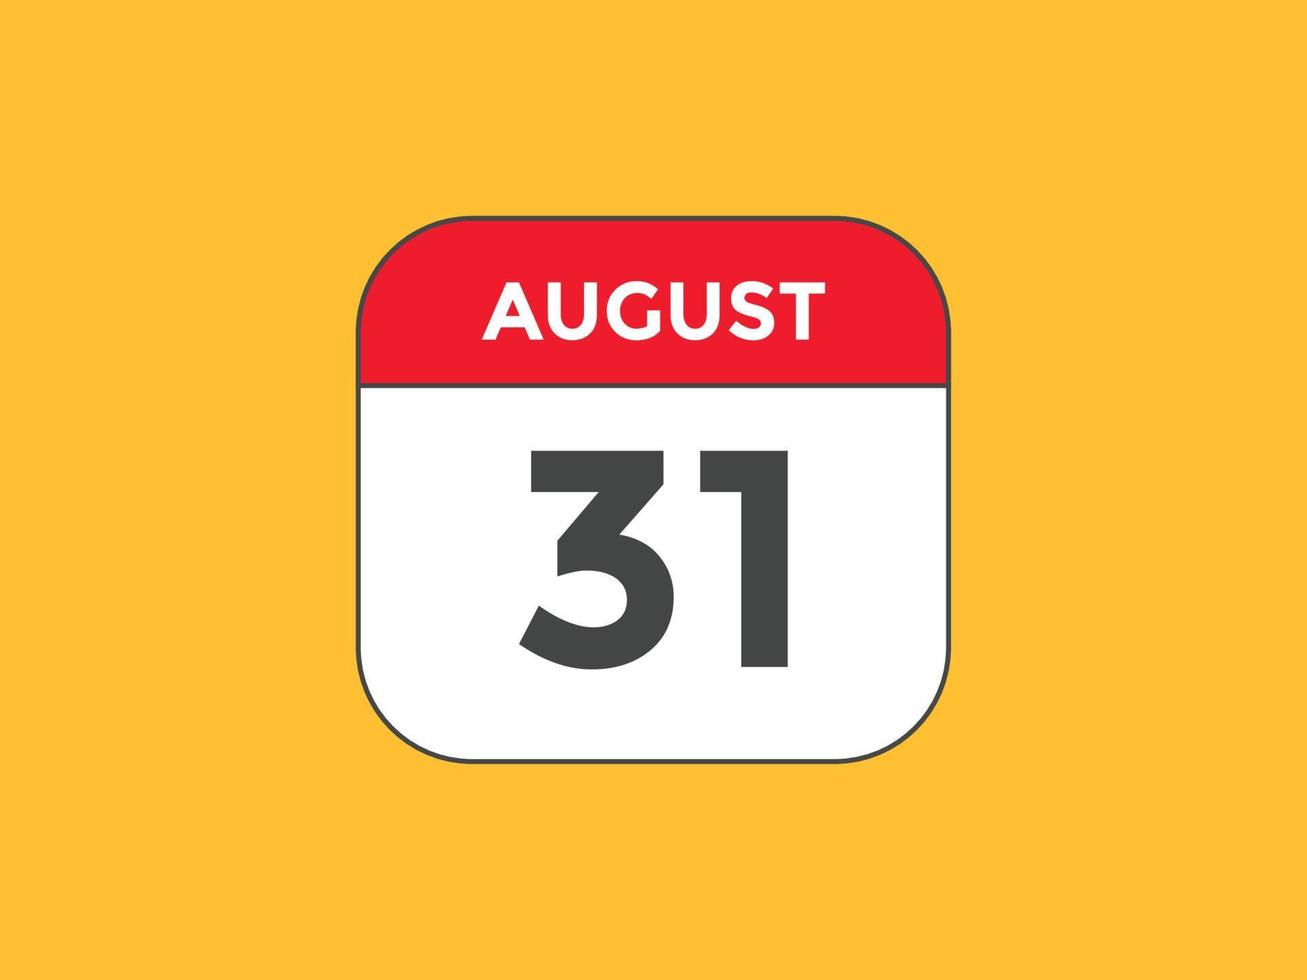 august 31 calendar reminder. 31th august daily calendar icon template. Calendar 31th august icon Design template. Vector illustration